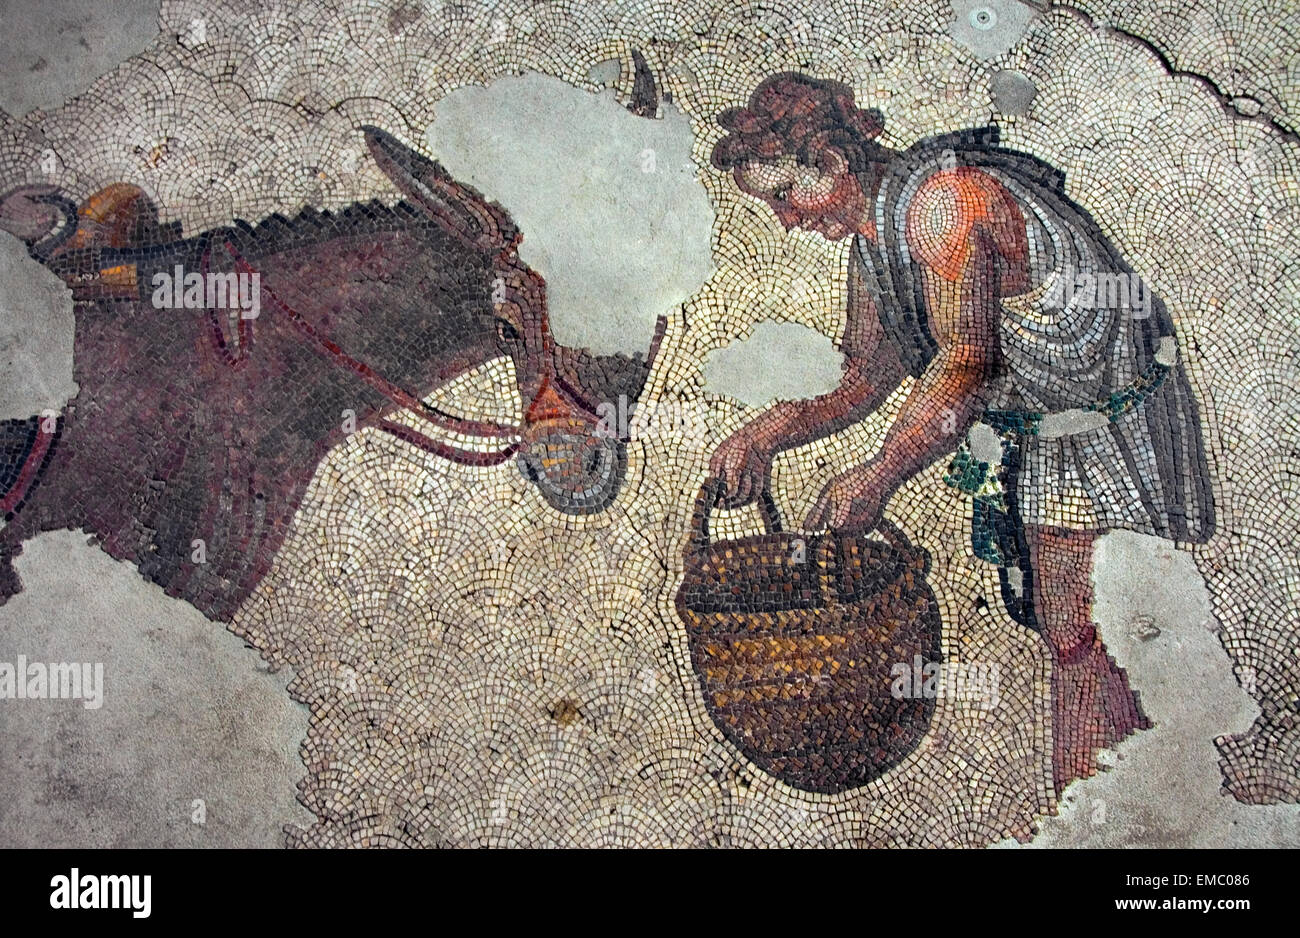 A human figure feeding a donkey represented over a mosaic, Istanbul Stock Photo